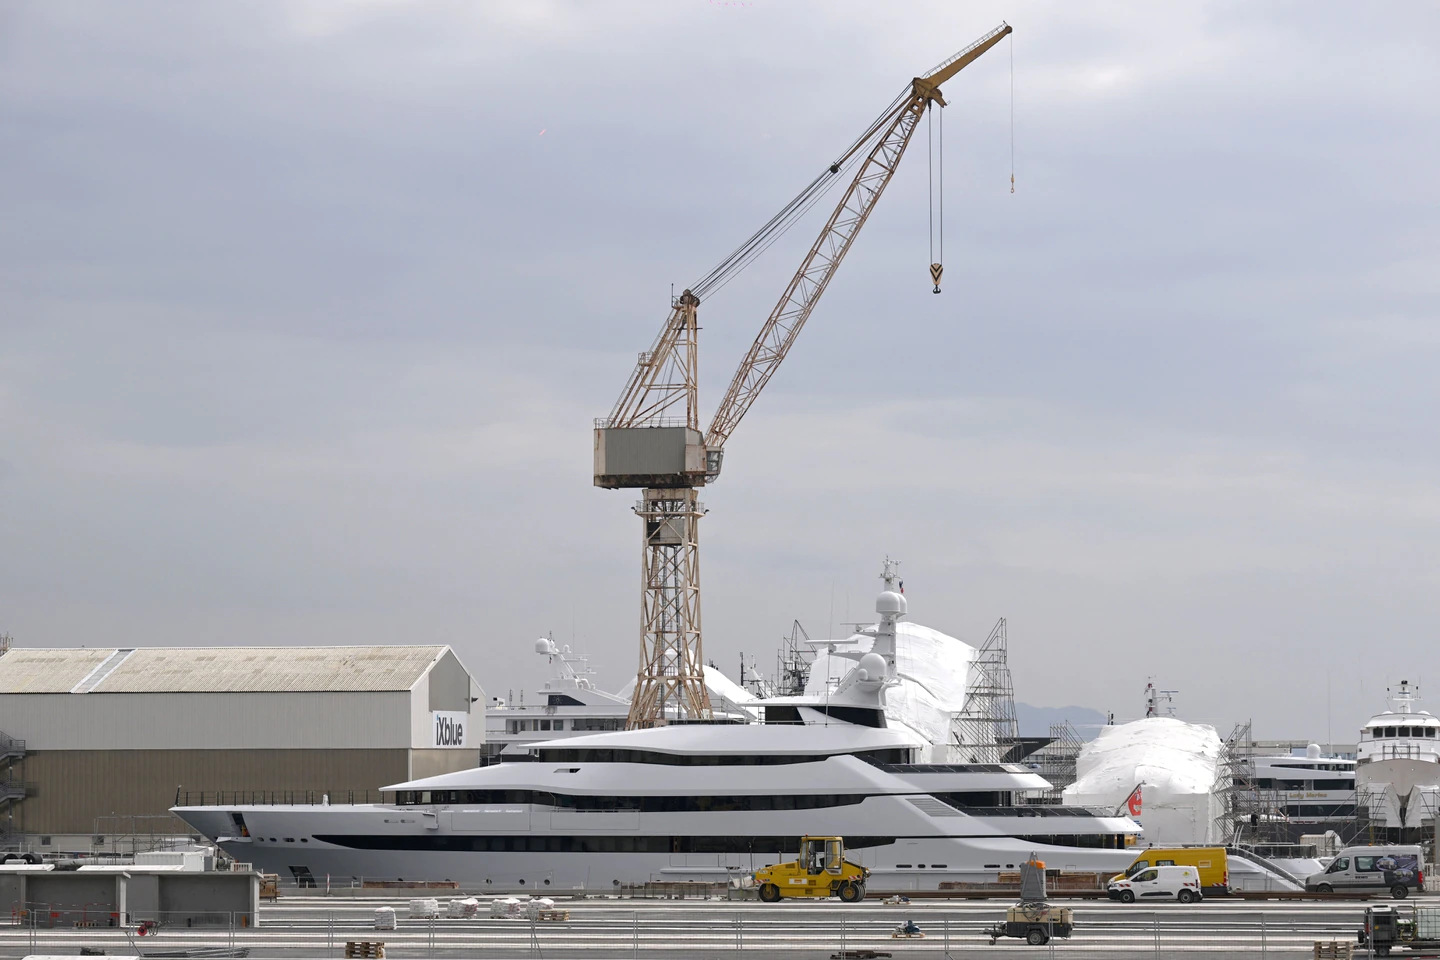 Amore Vero, a yacht owned by a company linked to Rosneft CEO Igor Sechin, docks in the La Ciotat shipyard near Marseille, France, on March 3. (NICOLAS TUCAT/AFP via Getty Images)